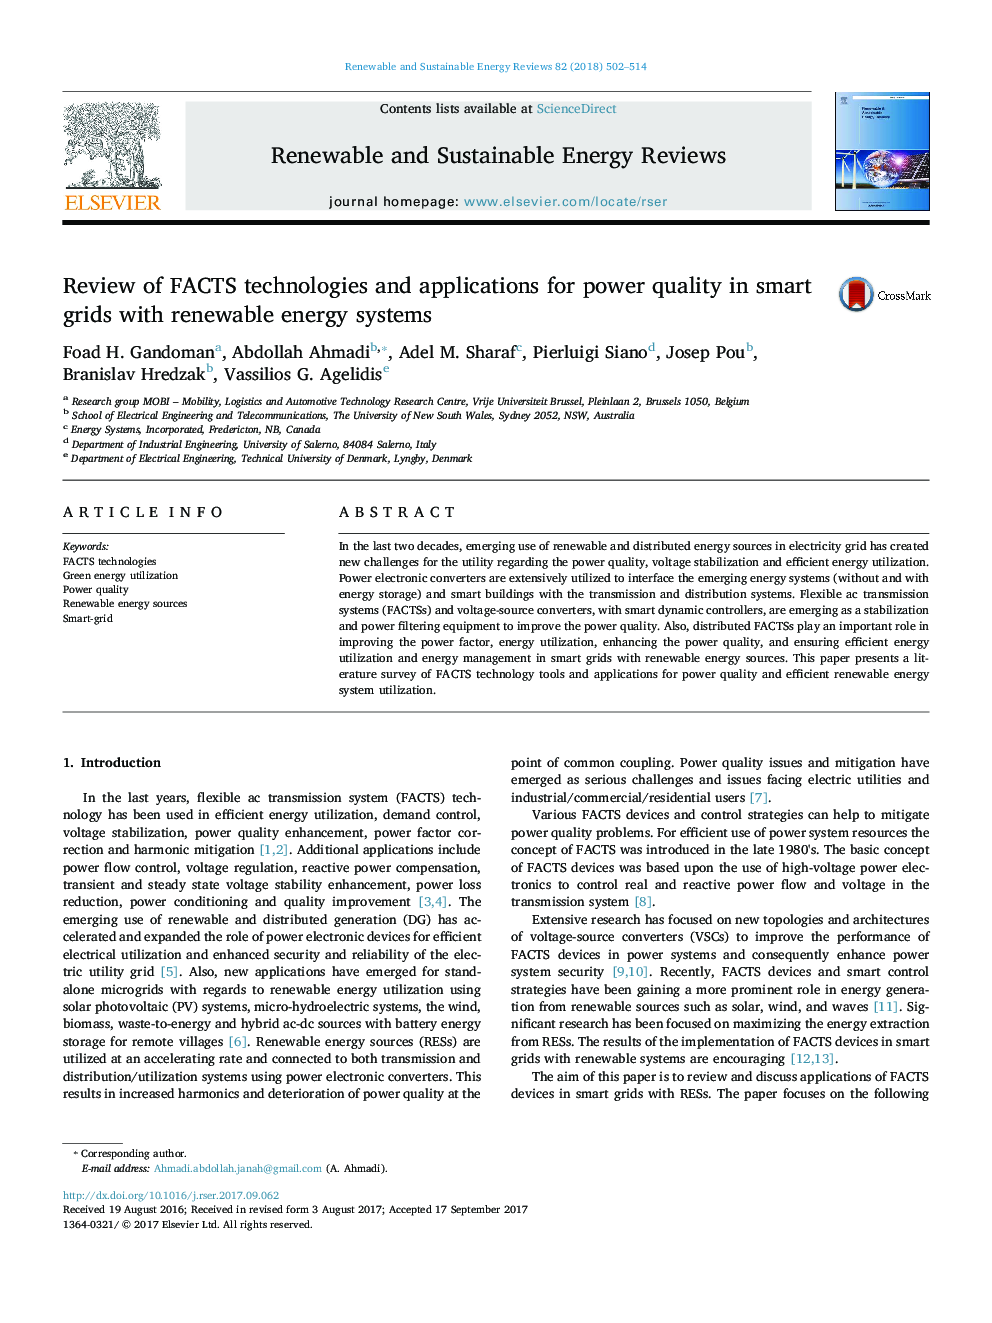 Review of FACTS technologies and applications for power quality in smart grids with renewable energy systems